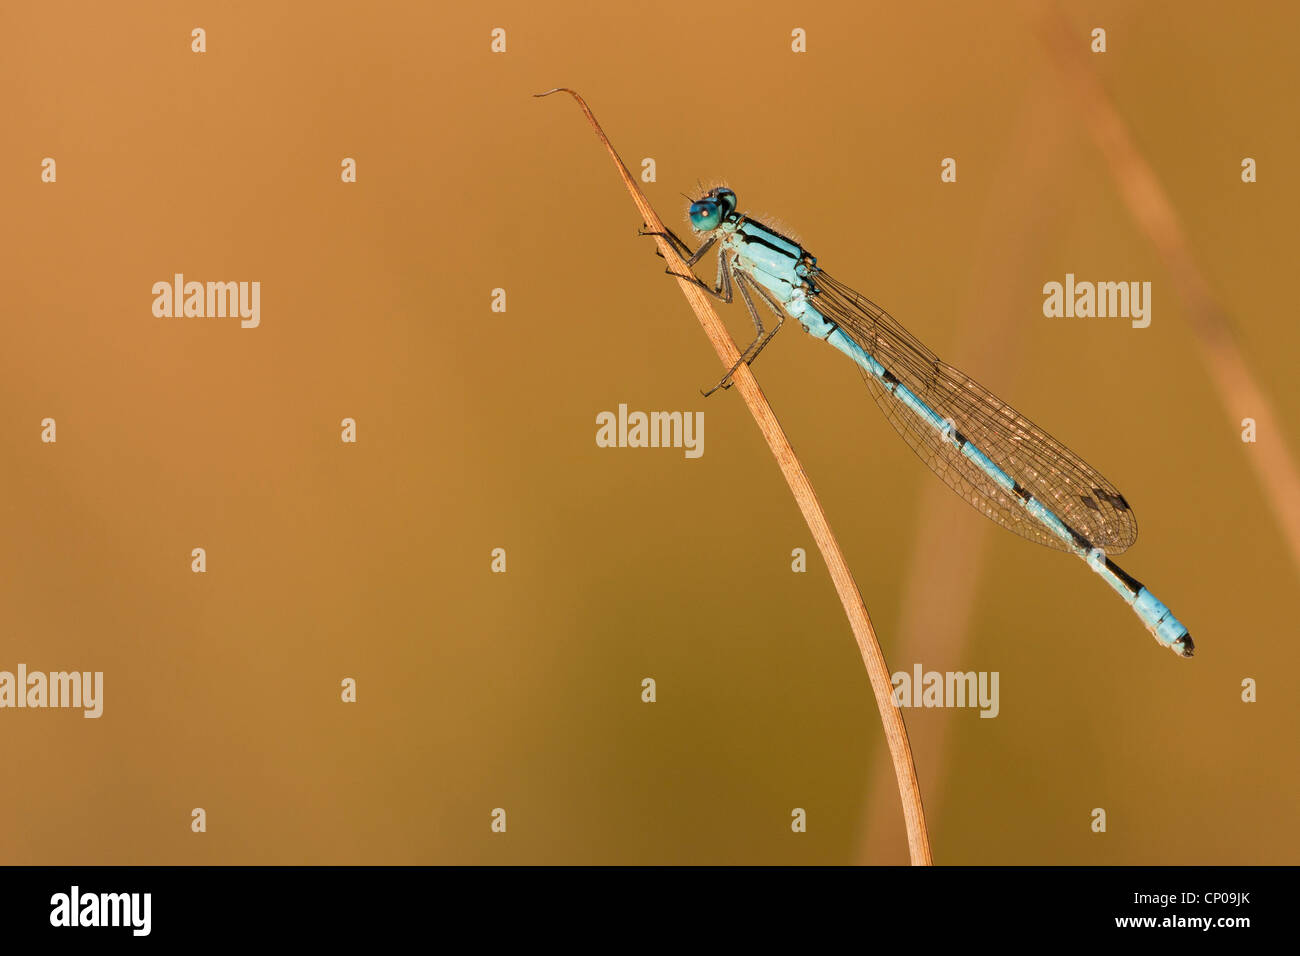 Eurasian Bluet (Coenagrion spec.), sitting at a sprout, Germany, Rhineland-Palatinate Stock Photo